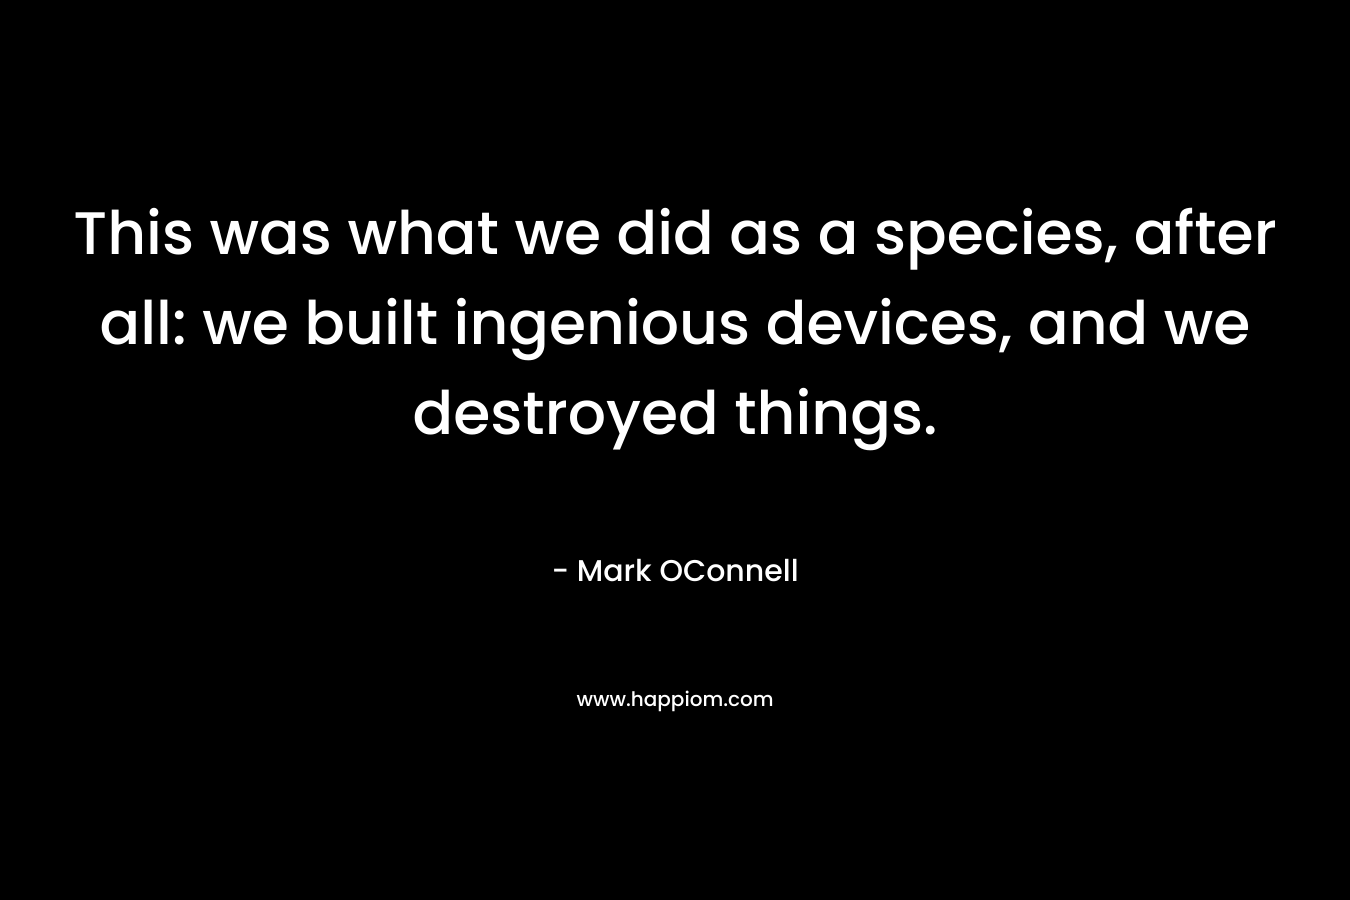 This was what we did as a species, after all: we built ingenious devices, and we destroyed things. – Mark OConnell